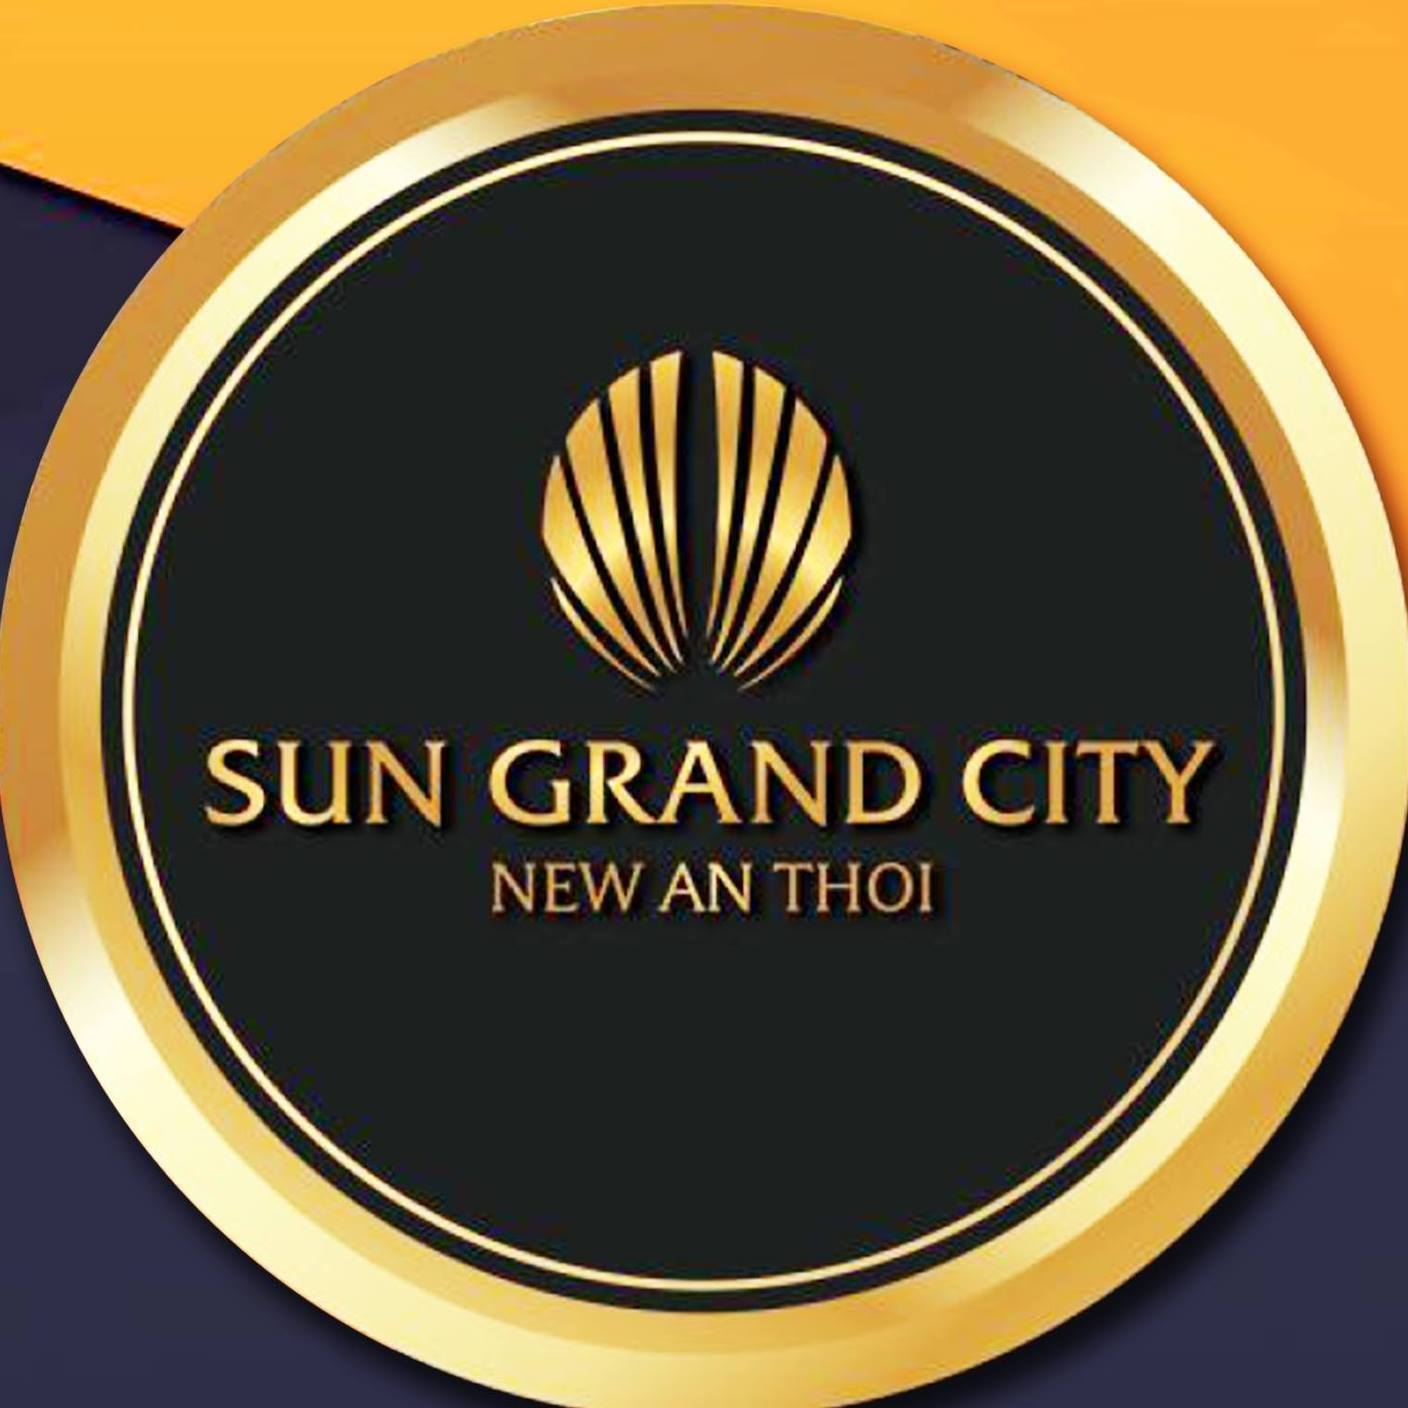 Image result for SUN GRAND CITY NEW AN THOI